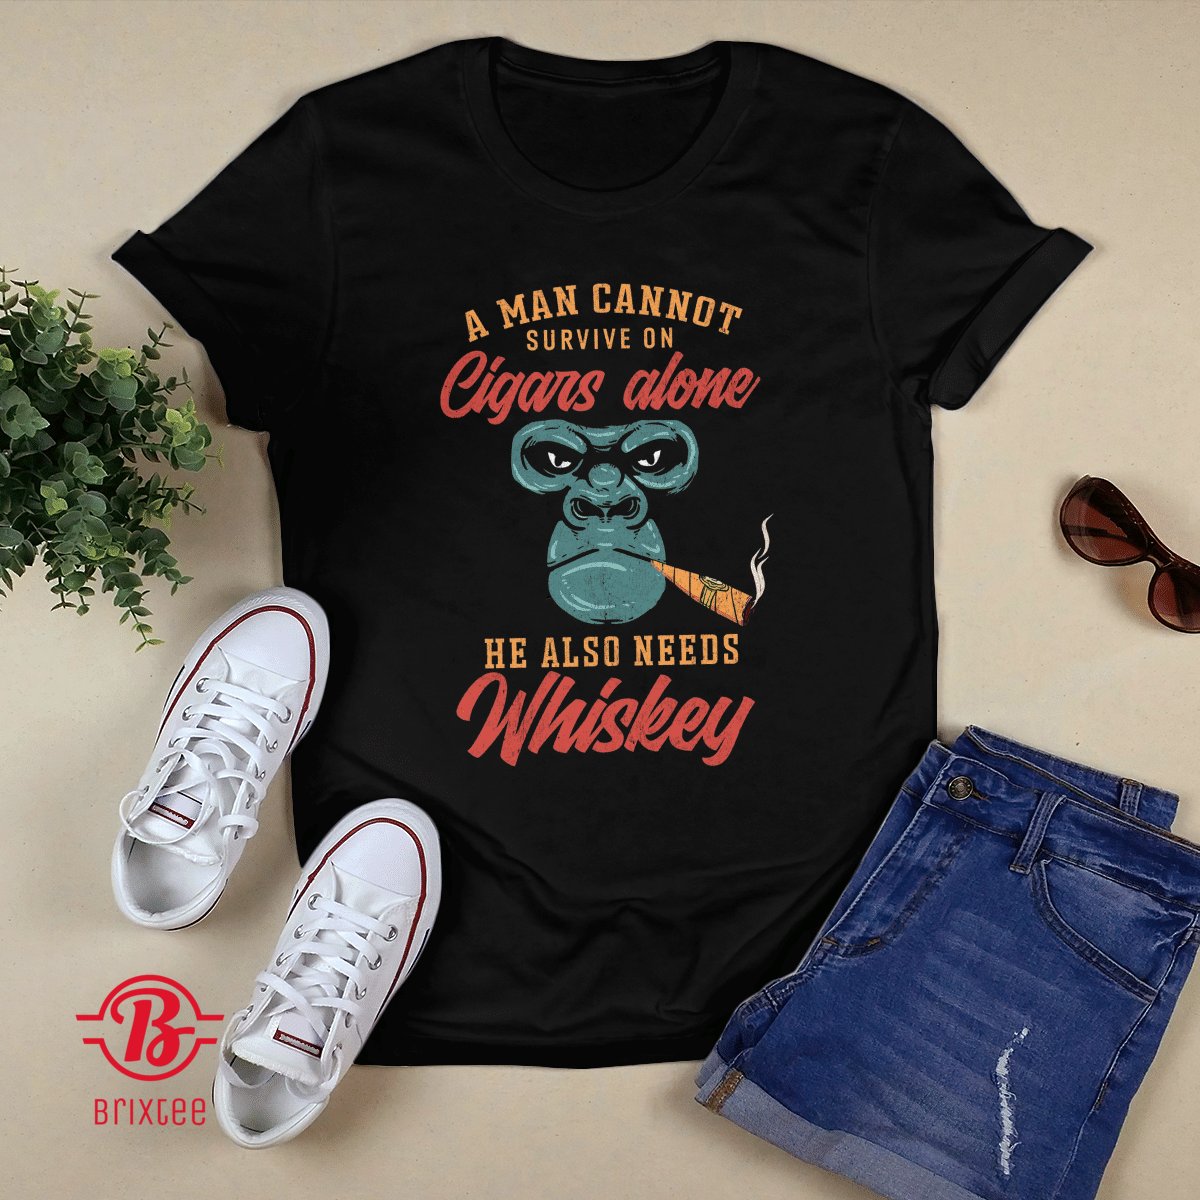 A Man Cannot Survive on Cigars Alone He Also Needs Whiskey